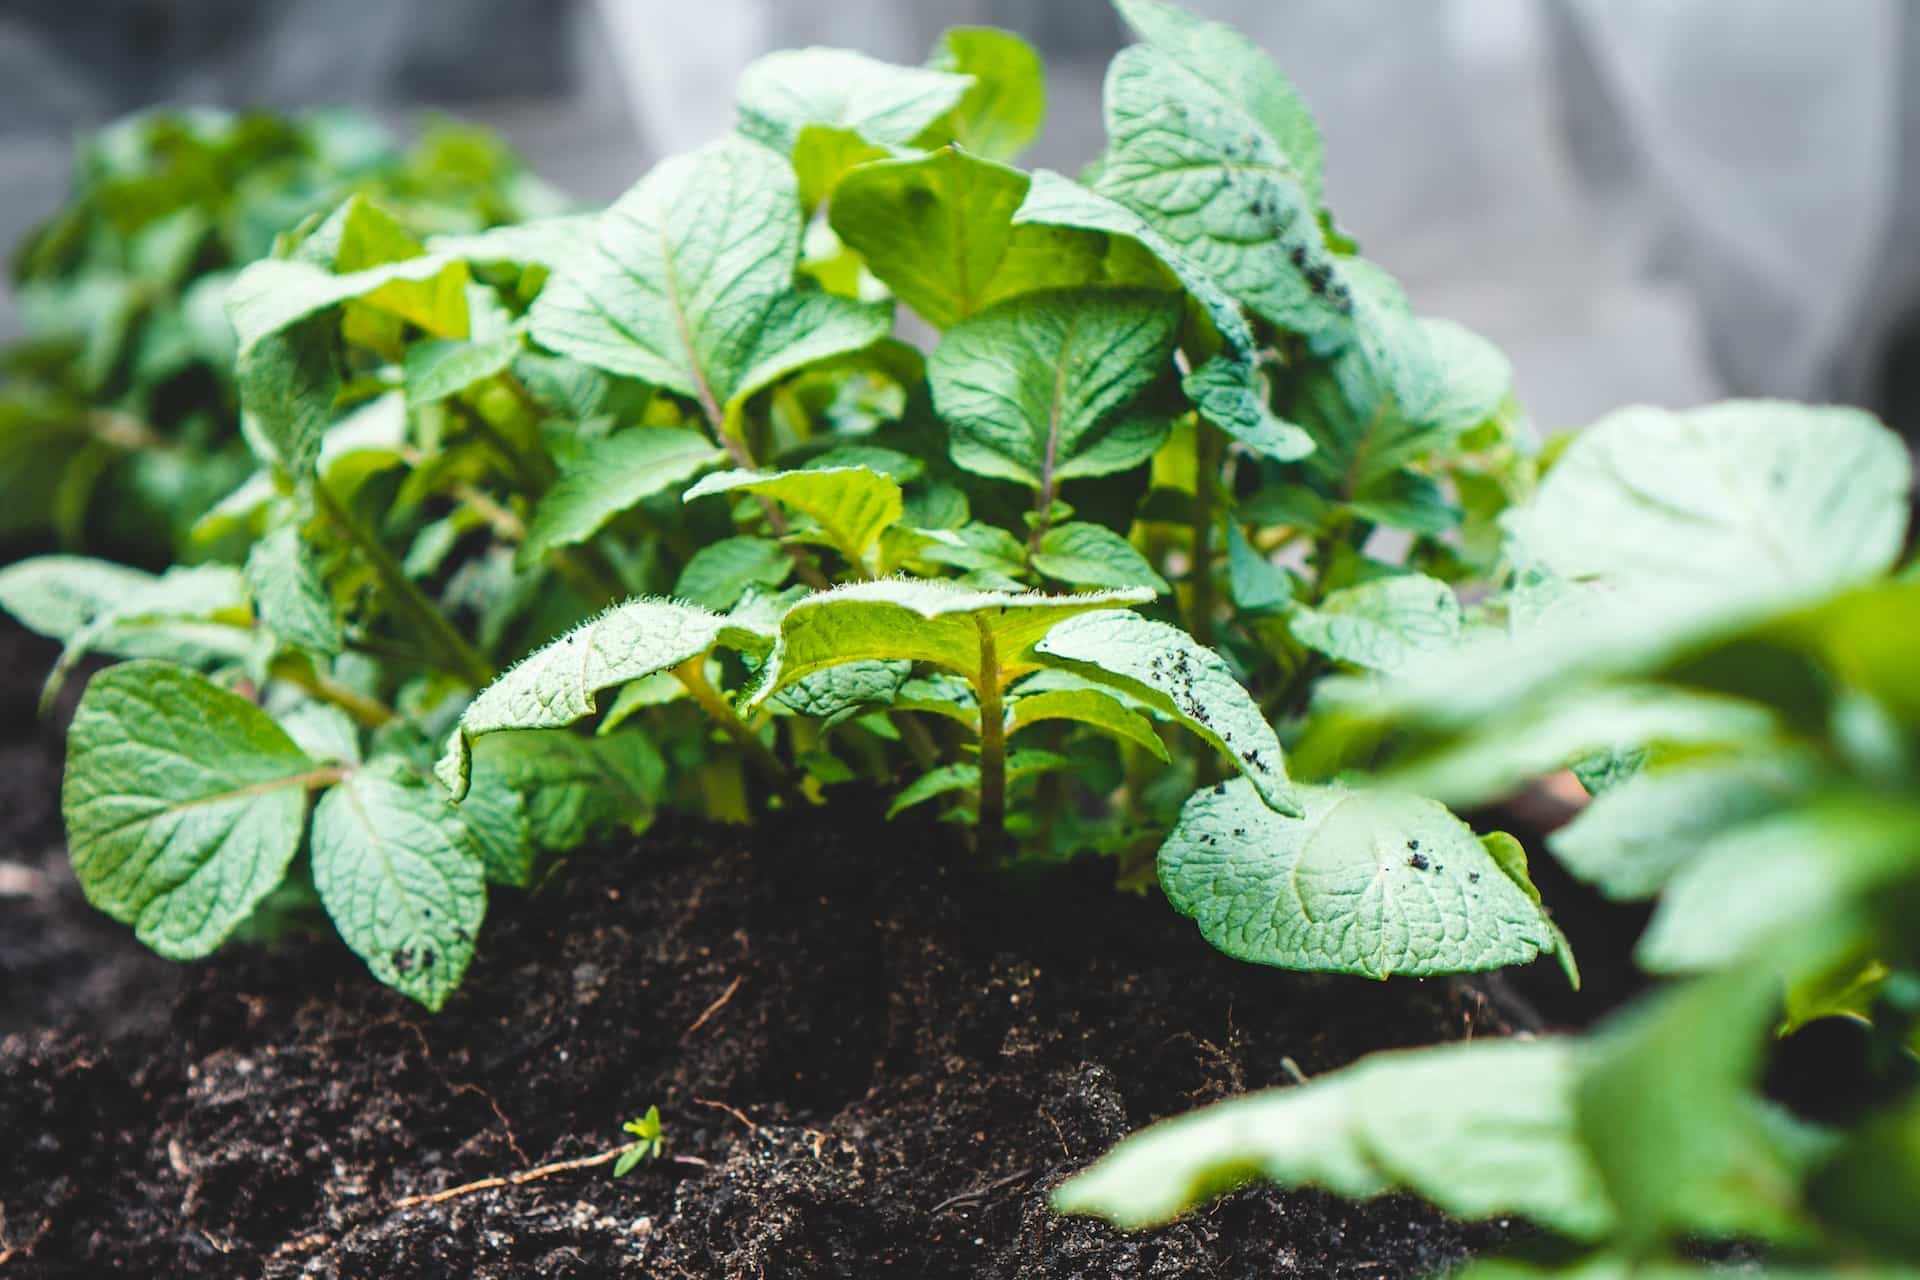 How To Grow Potatoes in a Container